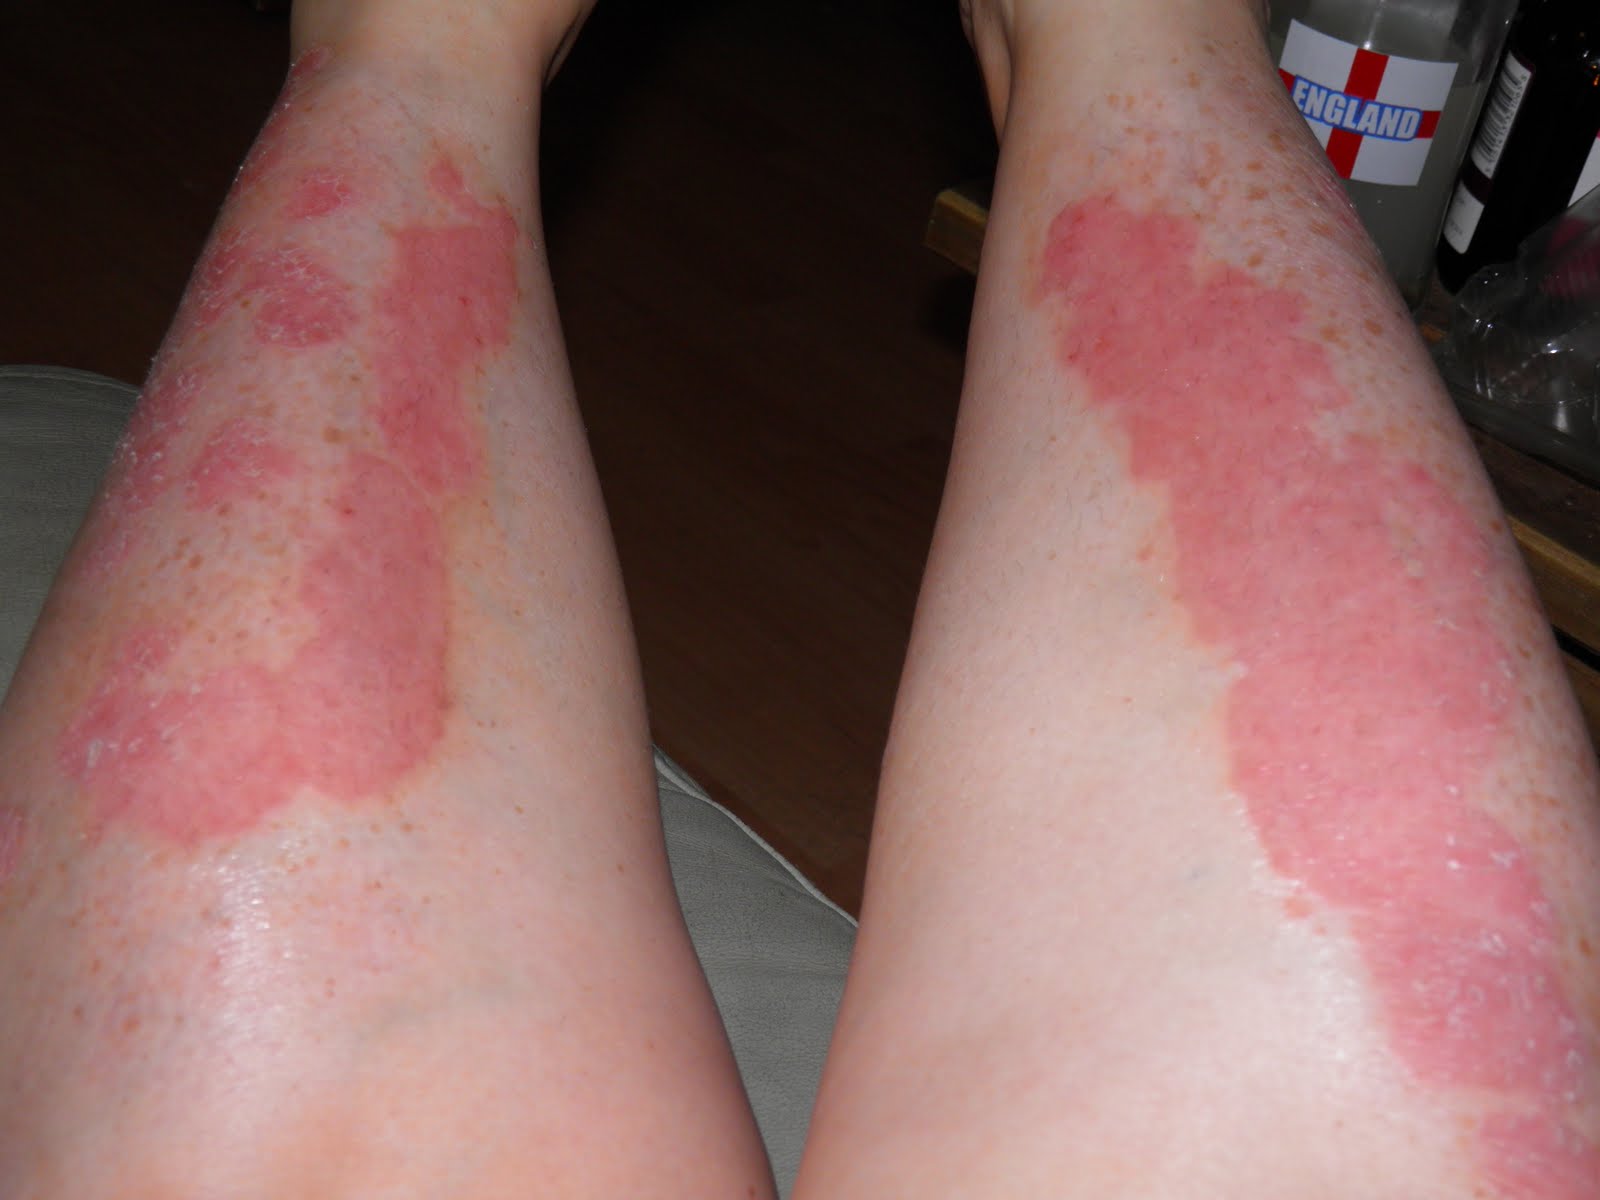 Psoriasis Patches on Legs